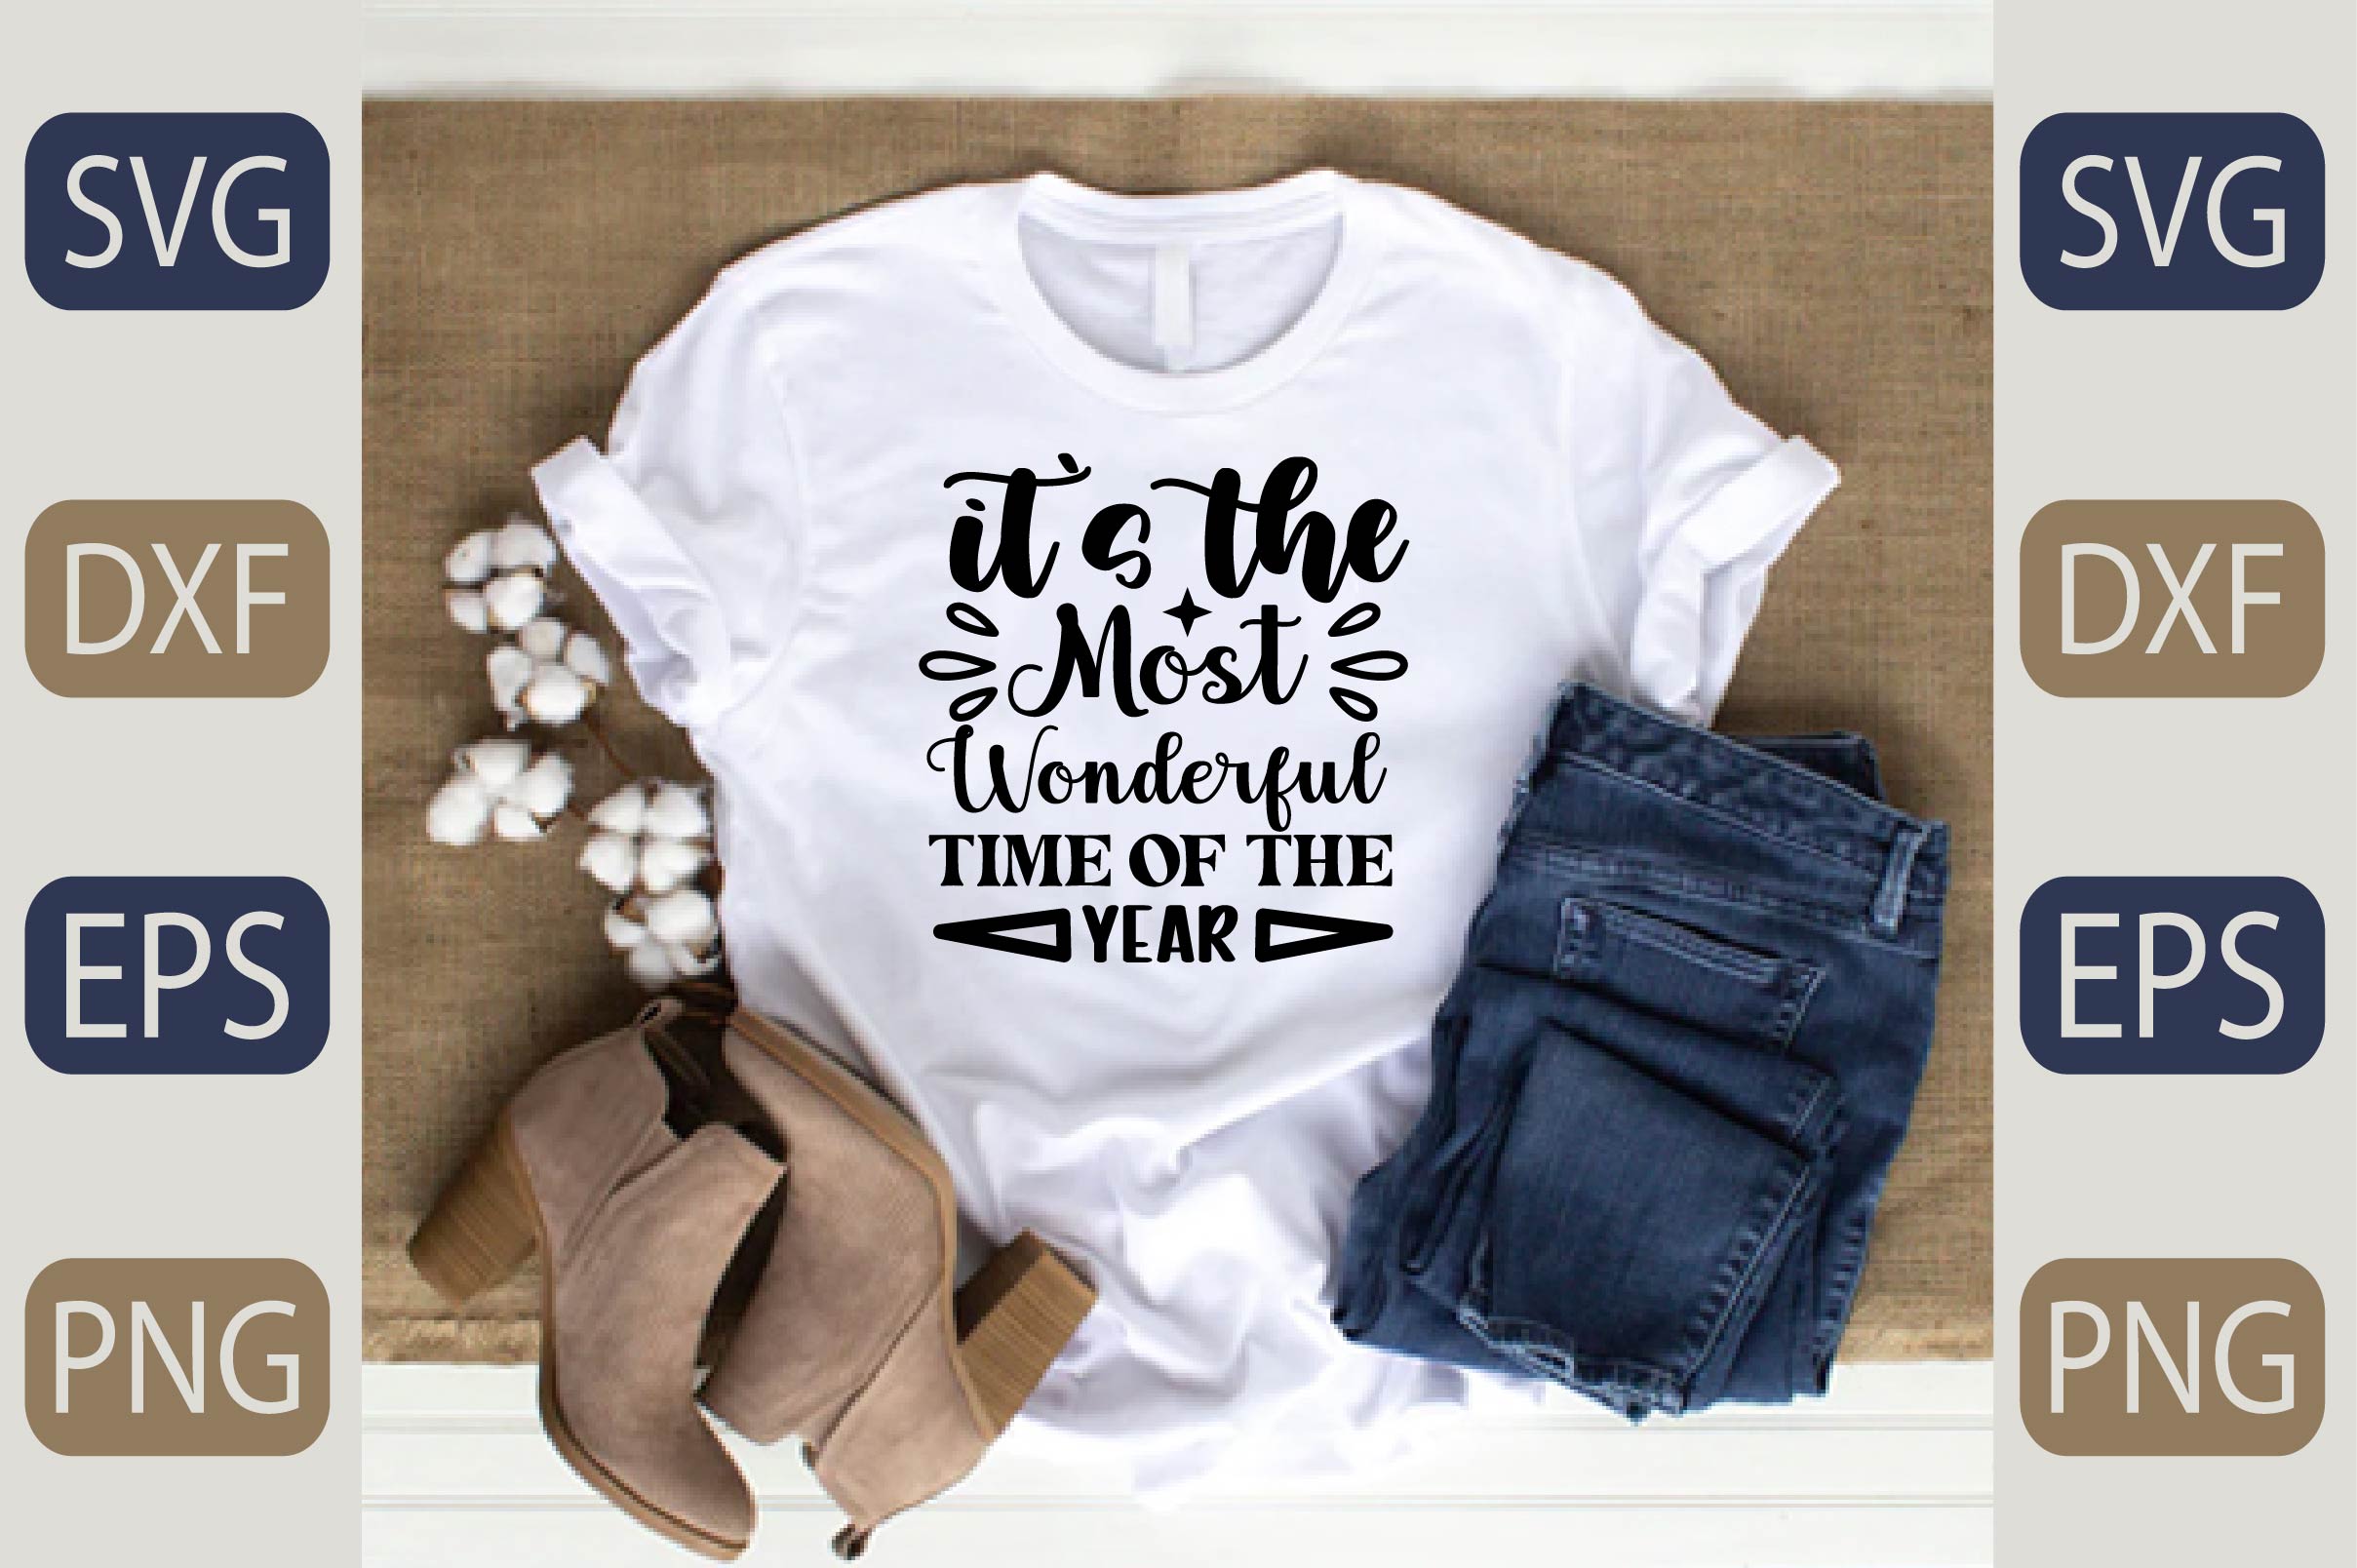 T - shirt that says to the most wonderful time of the year.